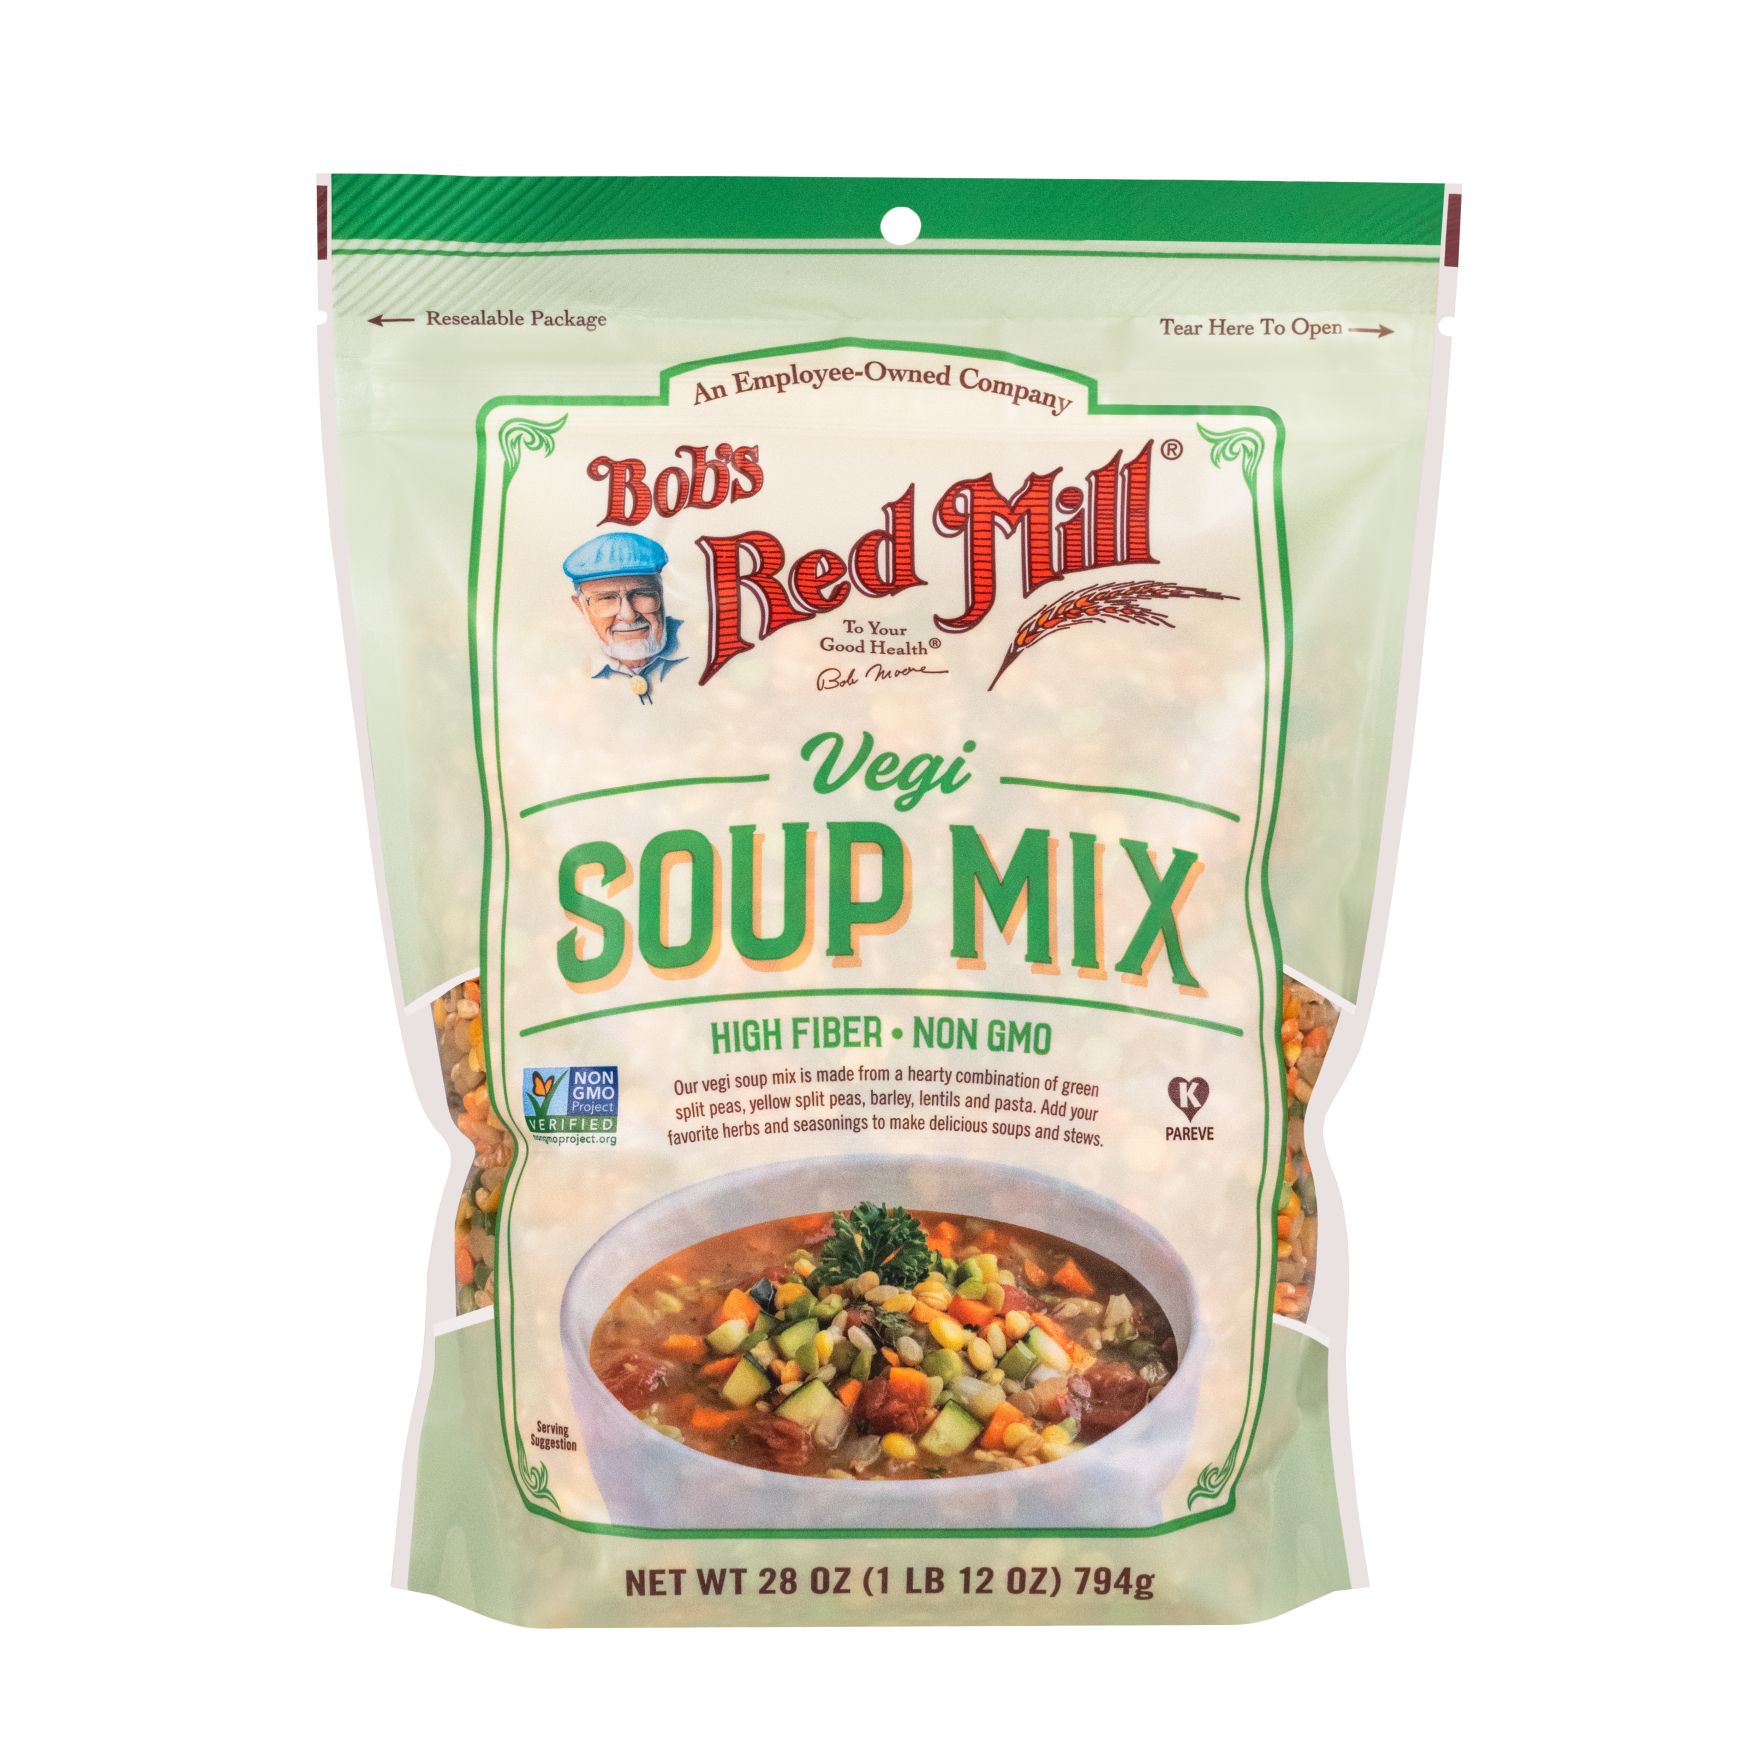 The Best Organic Soup Comes in a Classic Package